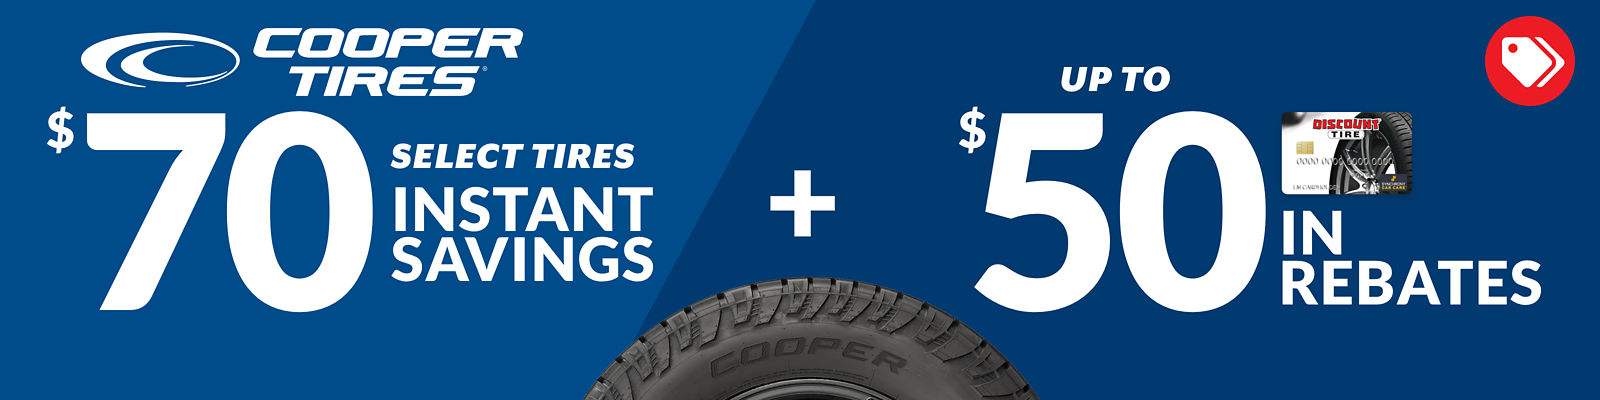 Cooper tire discount for May 2021 with Discount Tire Direct